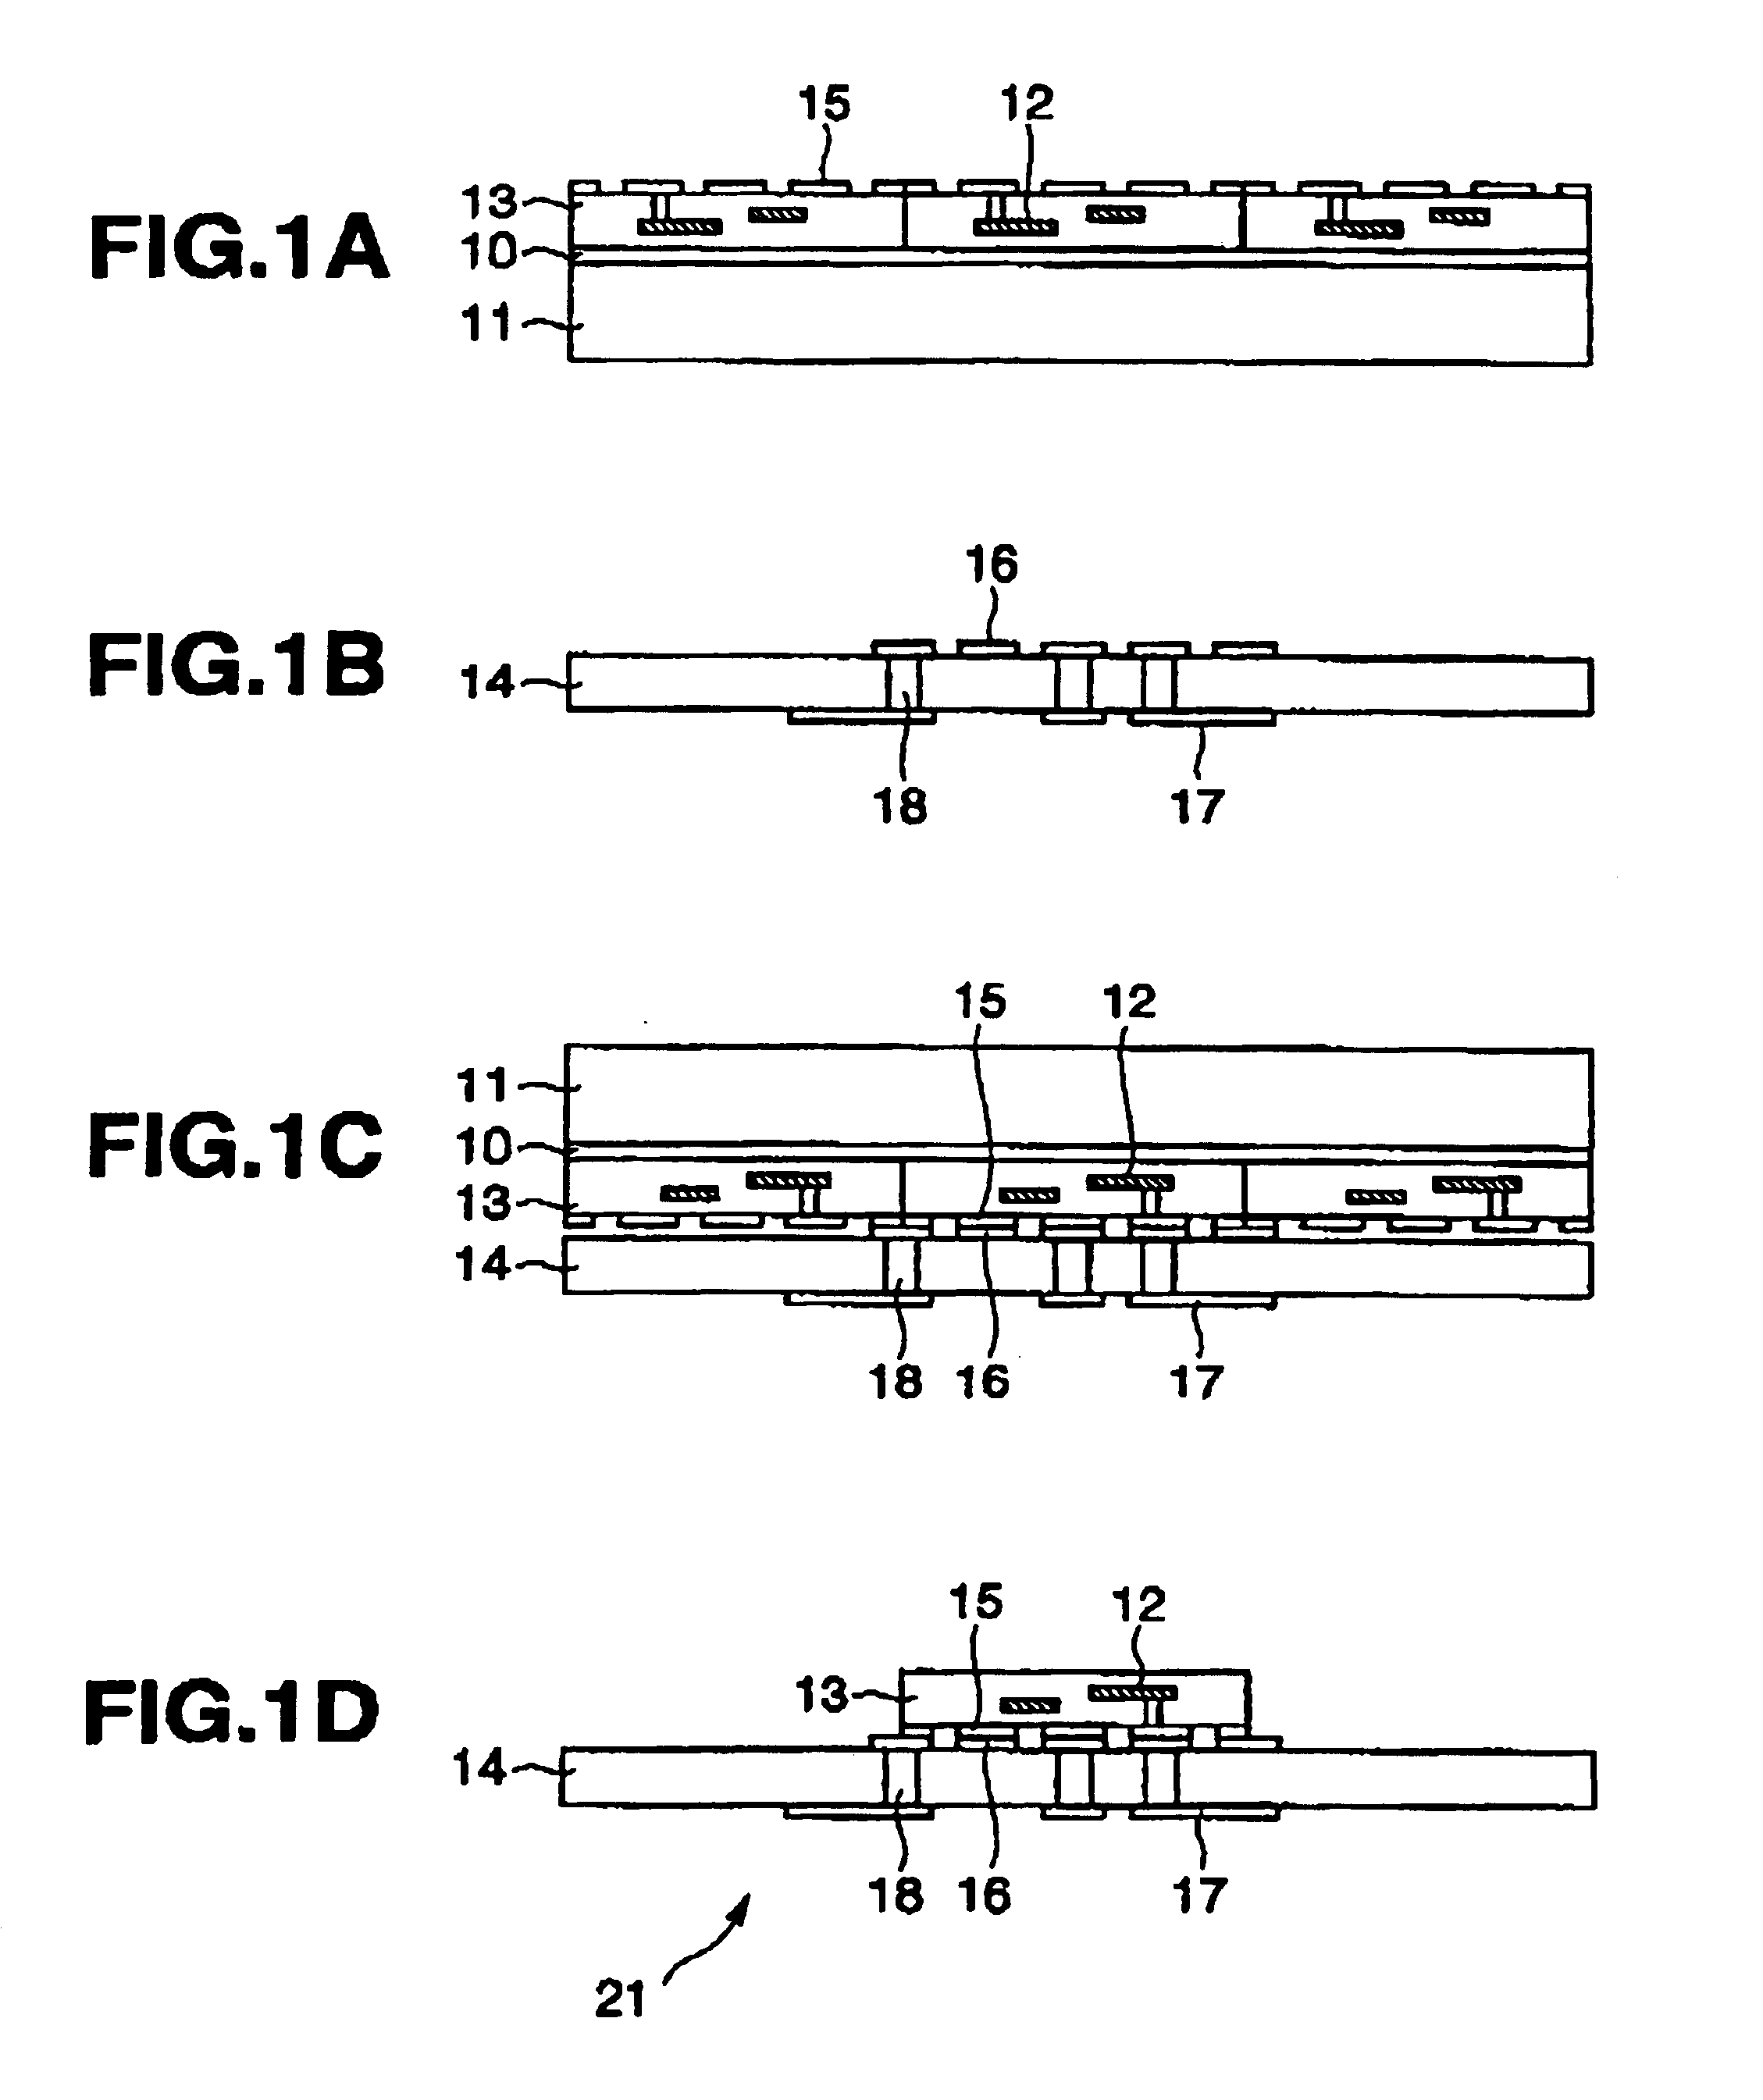 Method of manufacturing a semiconductor device having adjoining substrates